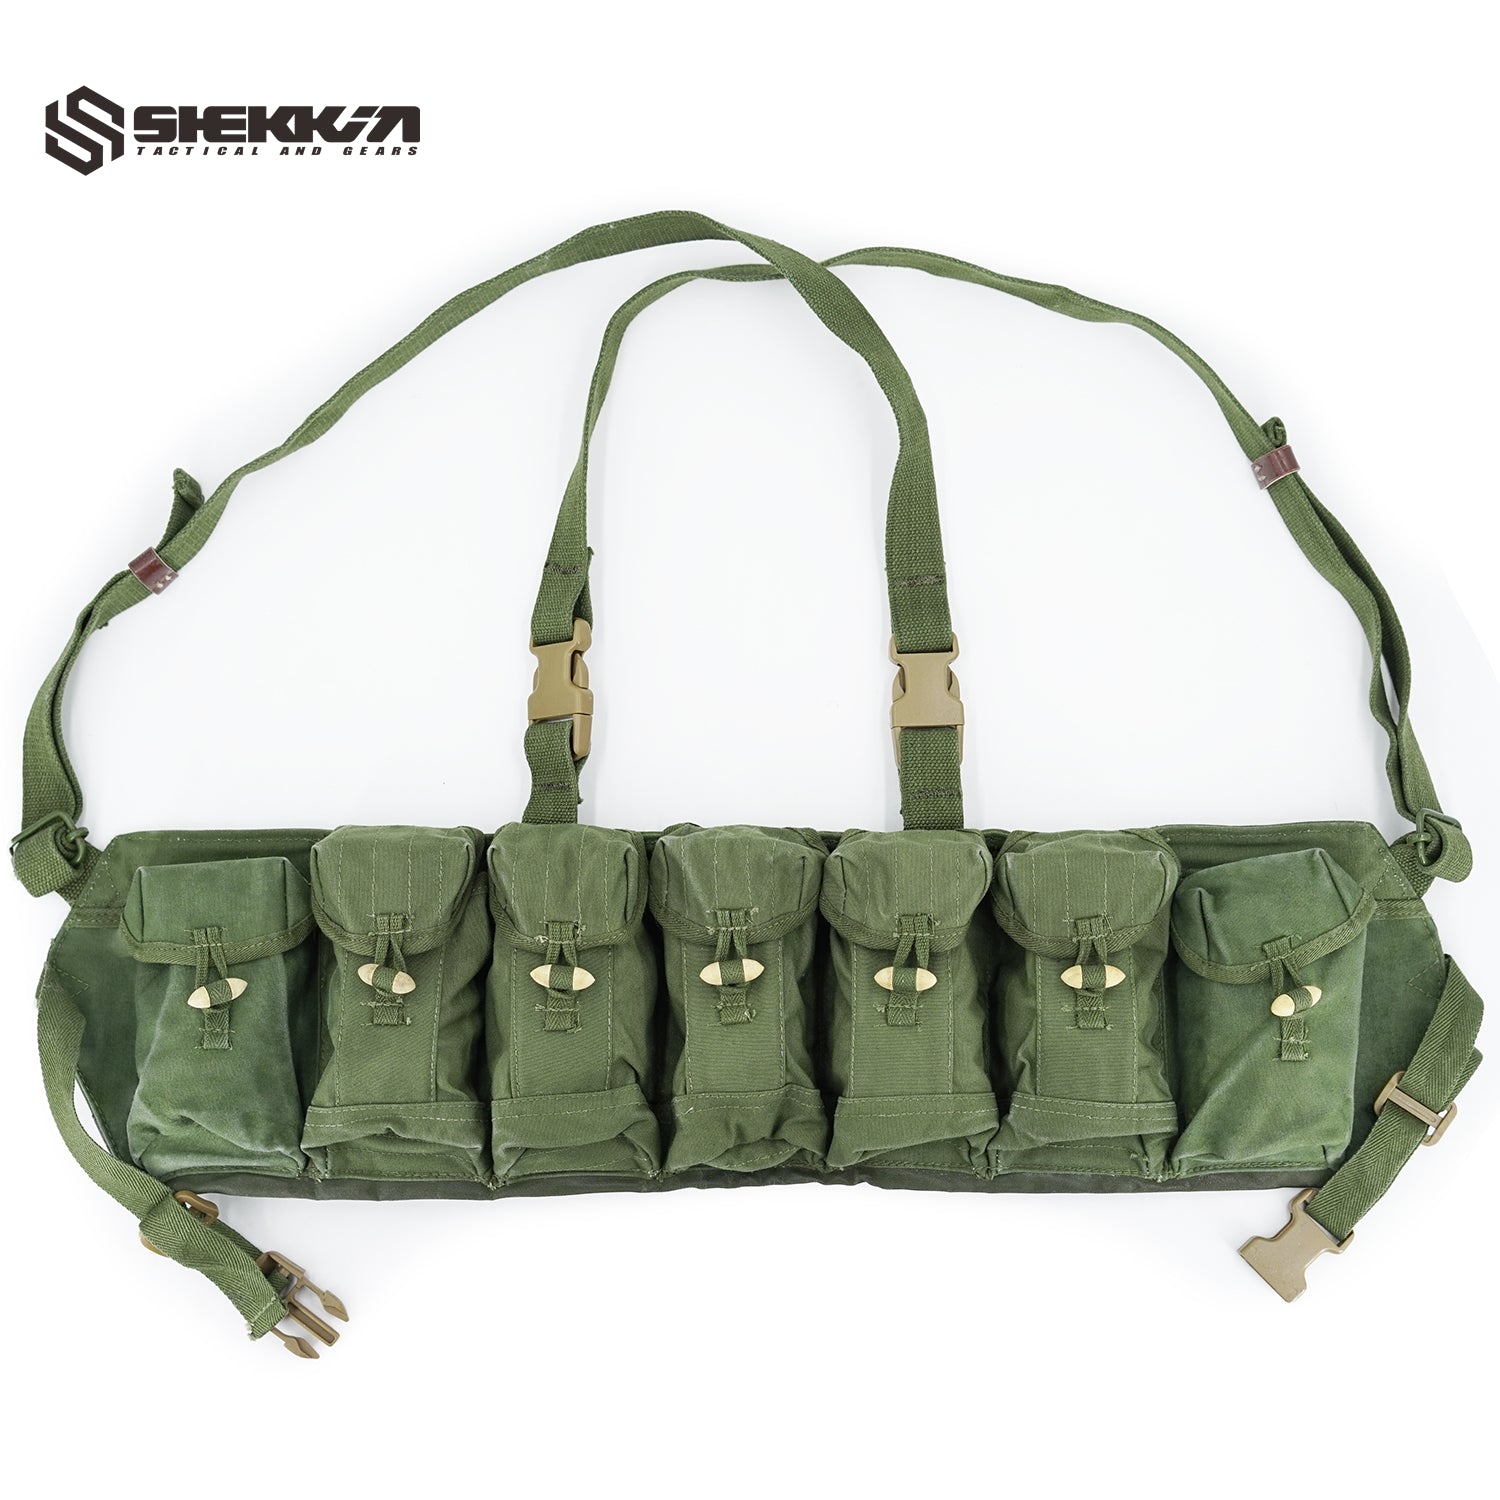 Arm The Poors: Chest Rig Edition R/tacticalgear, 53% OFF